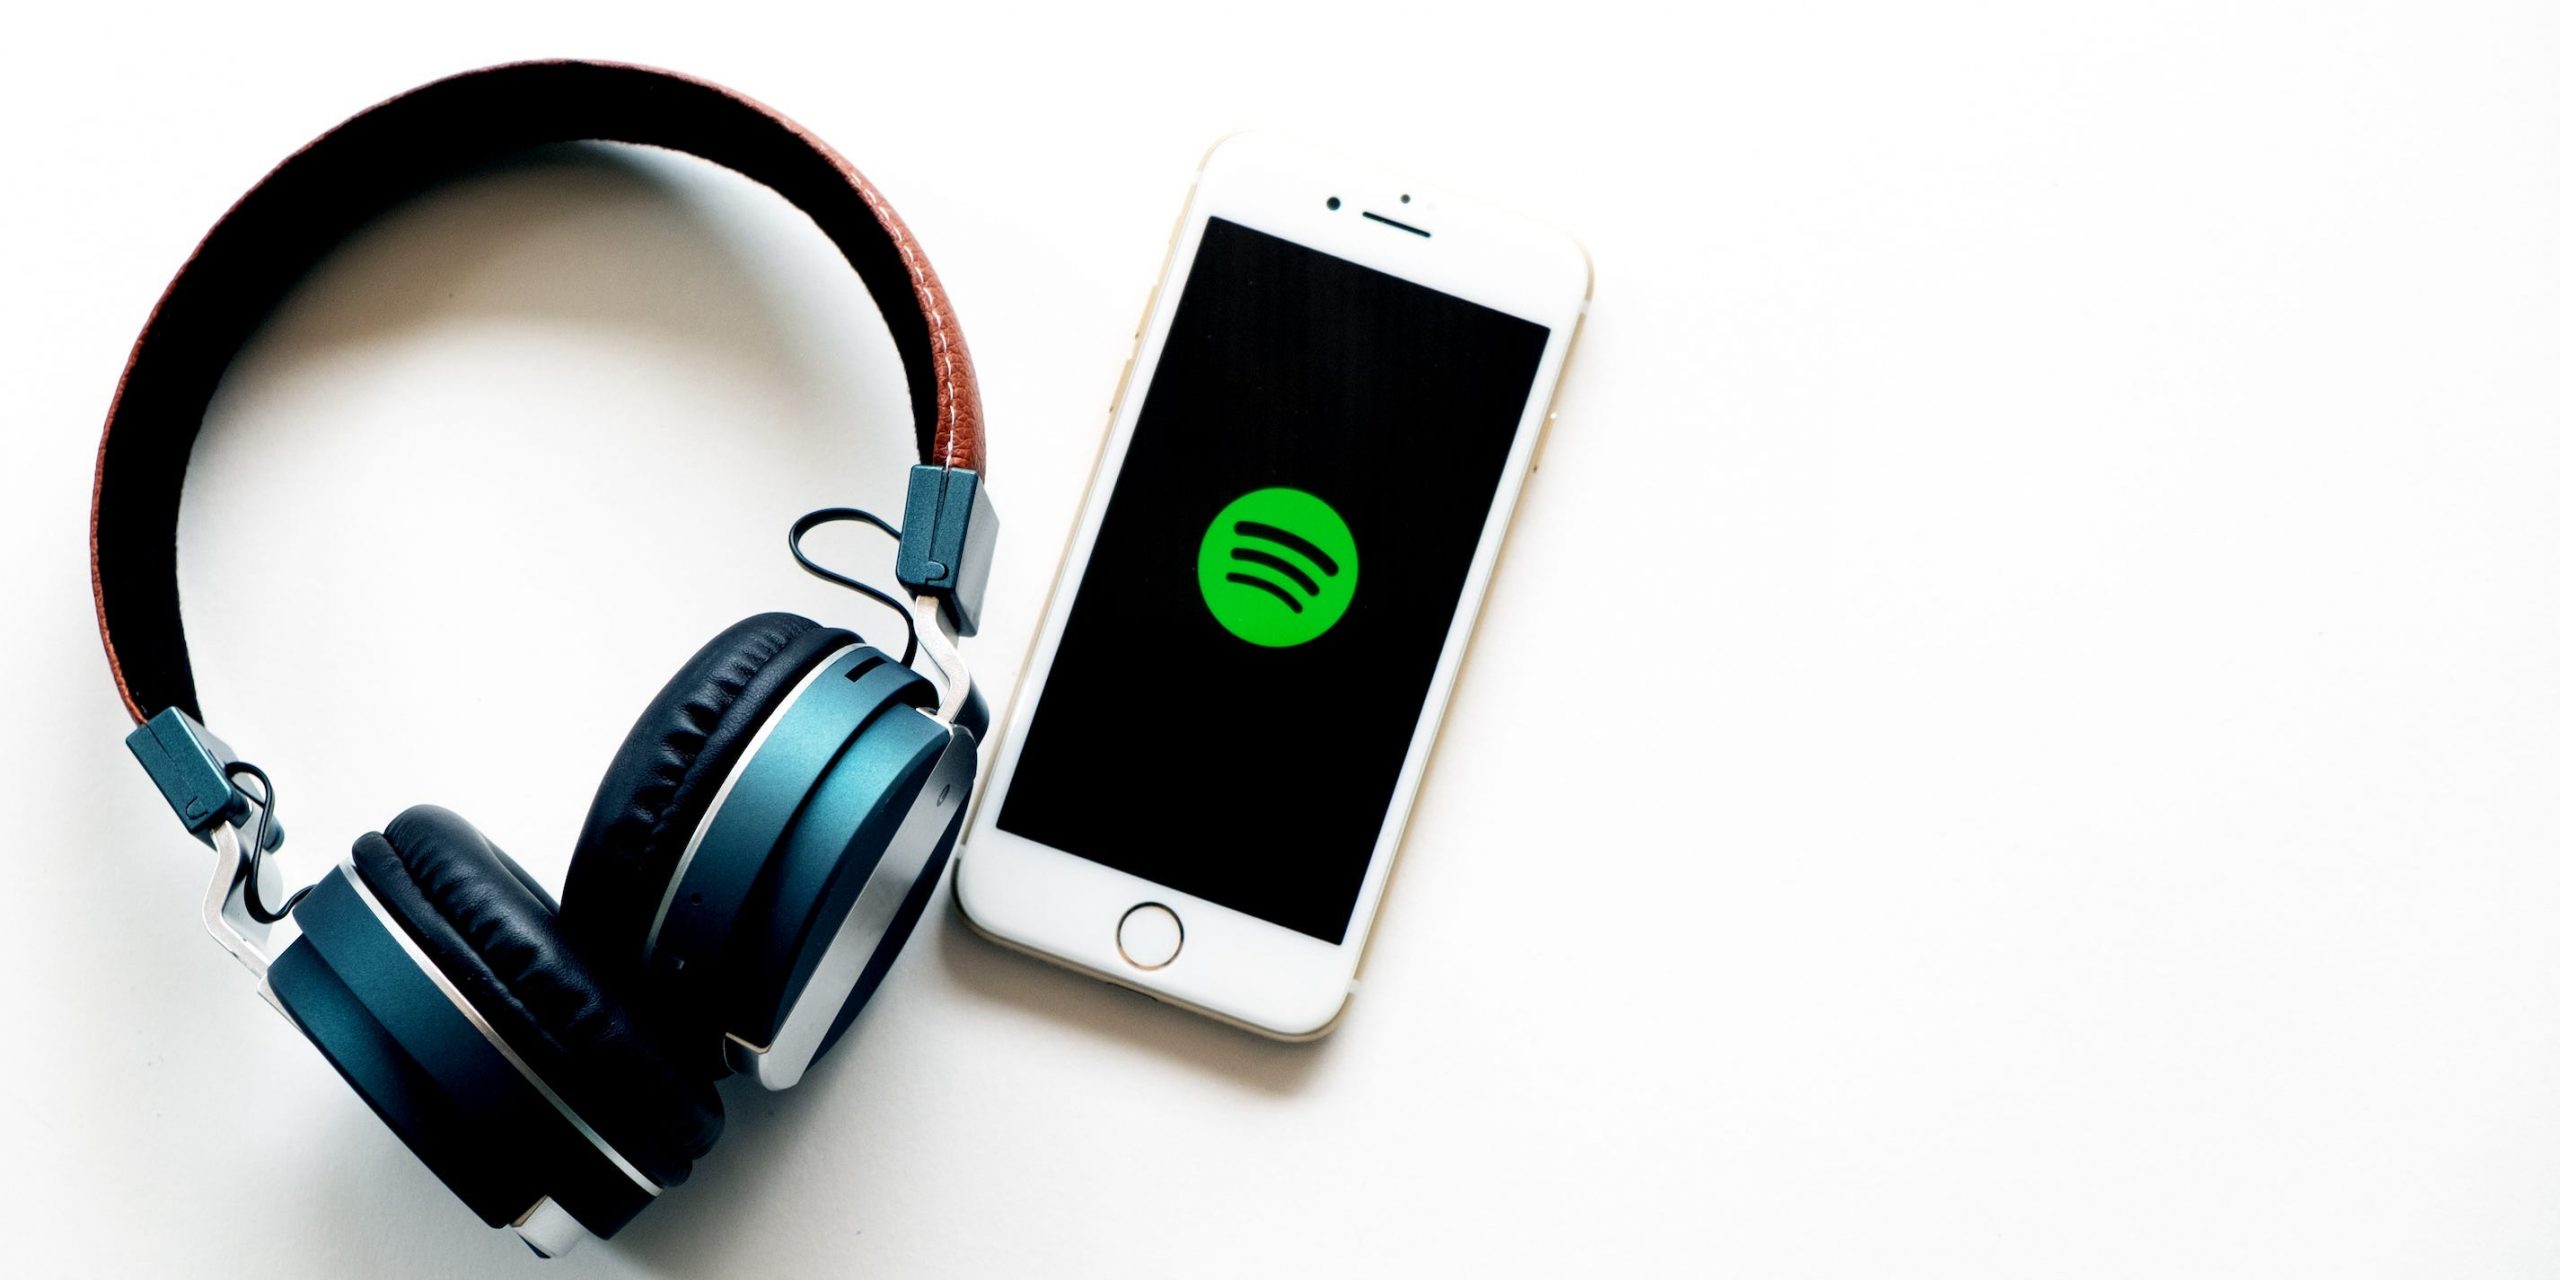 A pair of headphones laying next to a phone which displays the Spotify logo.